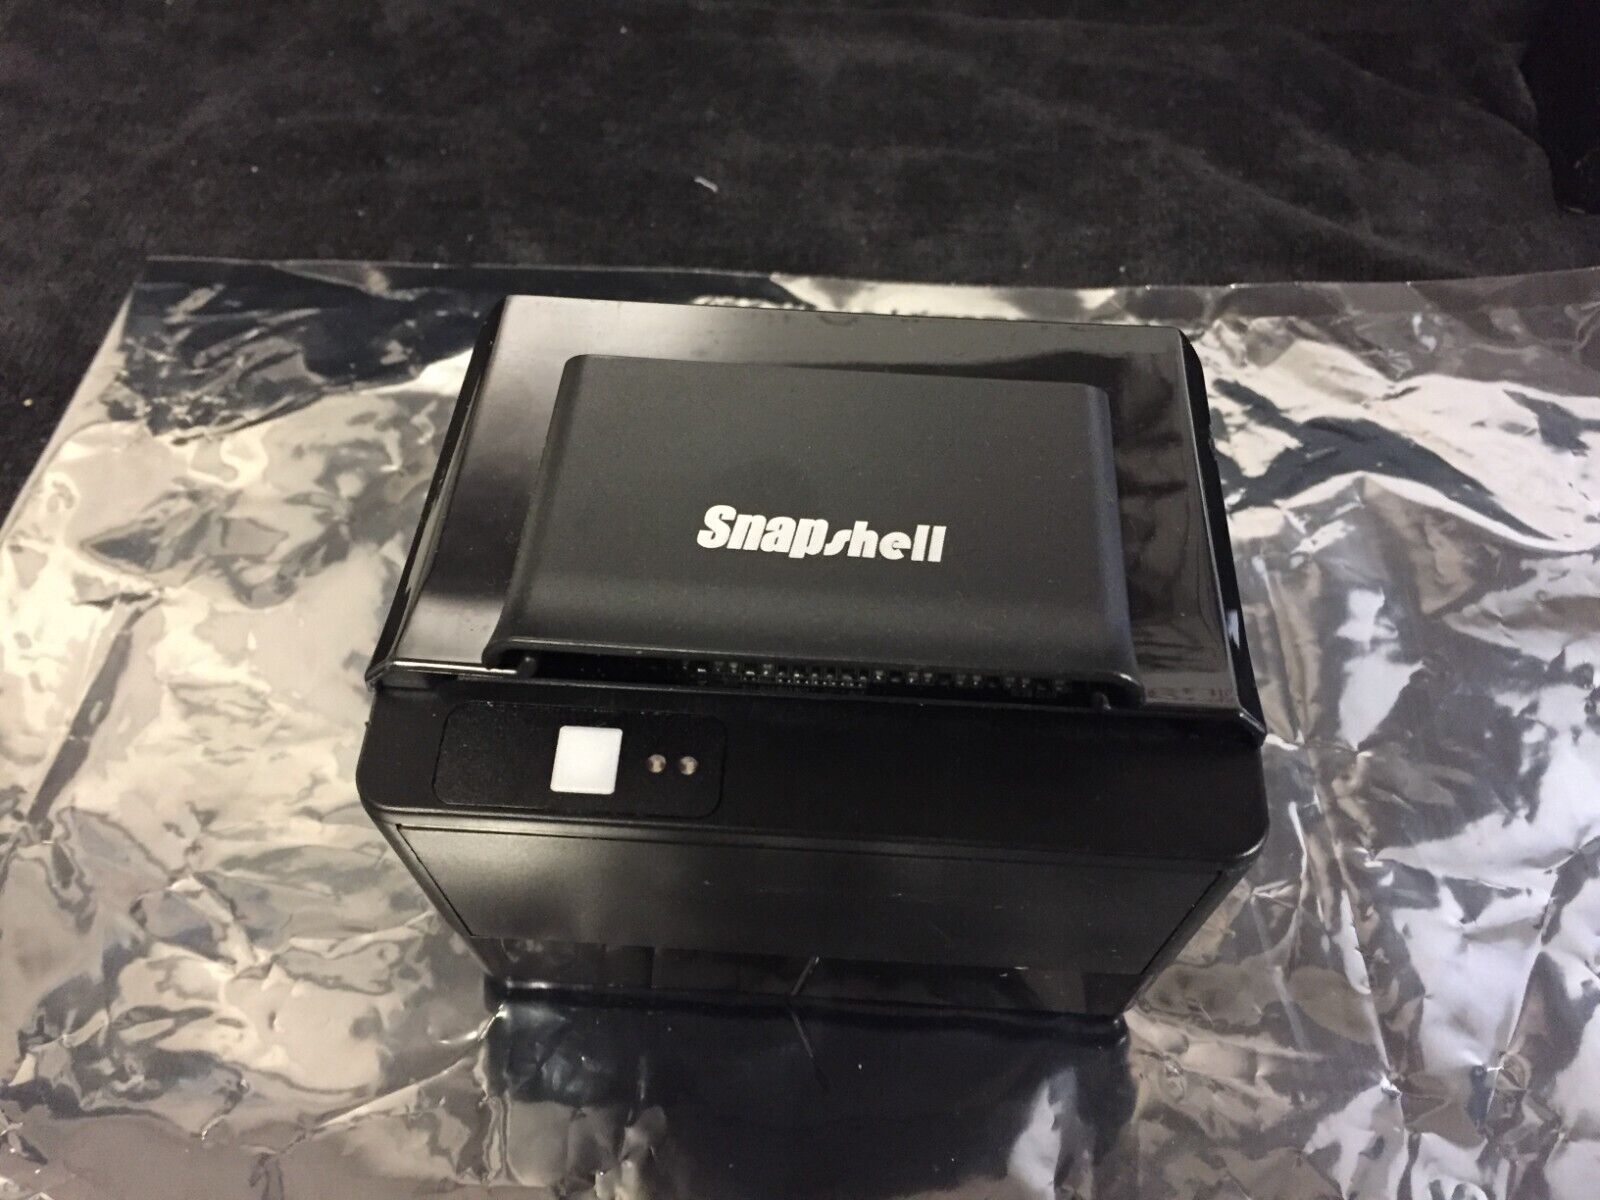 Acuant SNAPSHELL R2 V2 Driver License SCANNER ID Reader - Excellent Condition